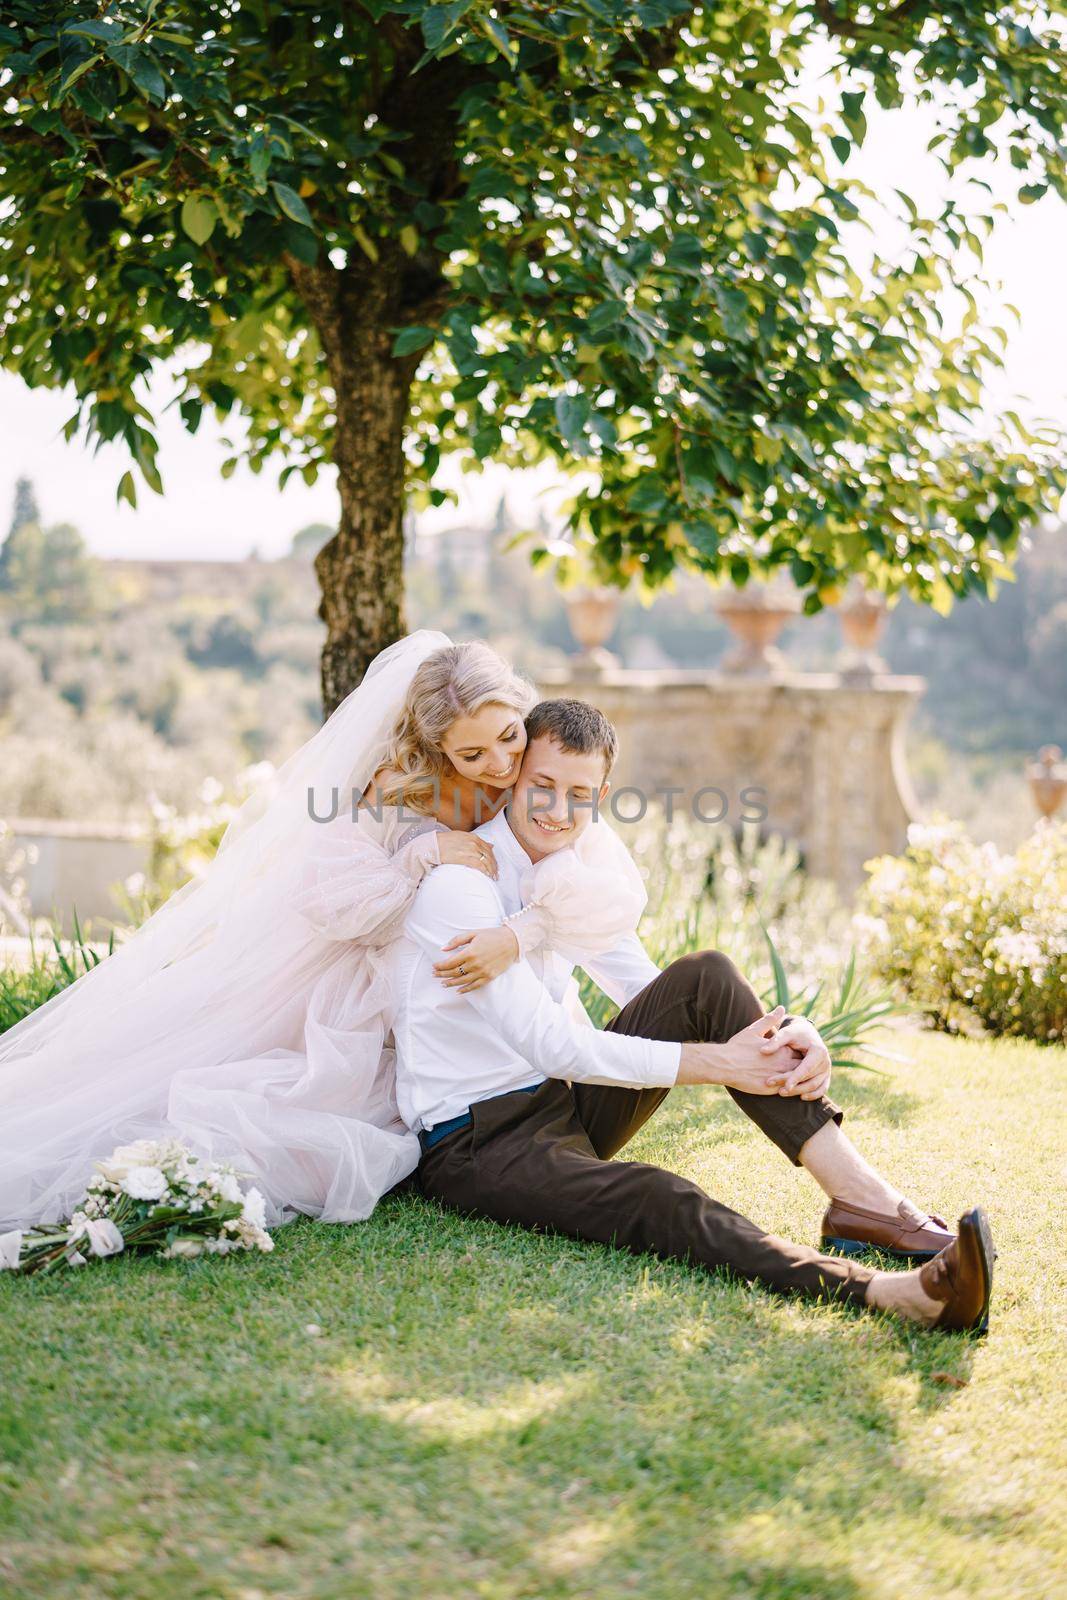 Wedding in Florence, Italy, in an old villa-winery. A wedding couple is sitting on the grass in the garden under a tree, the bride is hugging the groom. by Nadtochiy